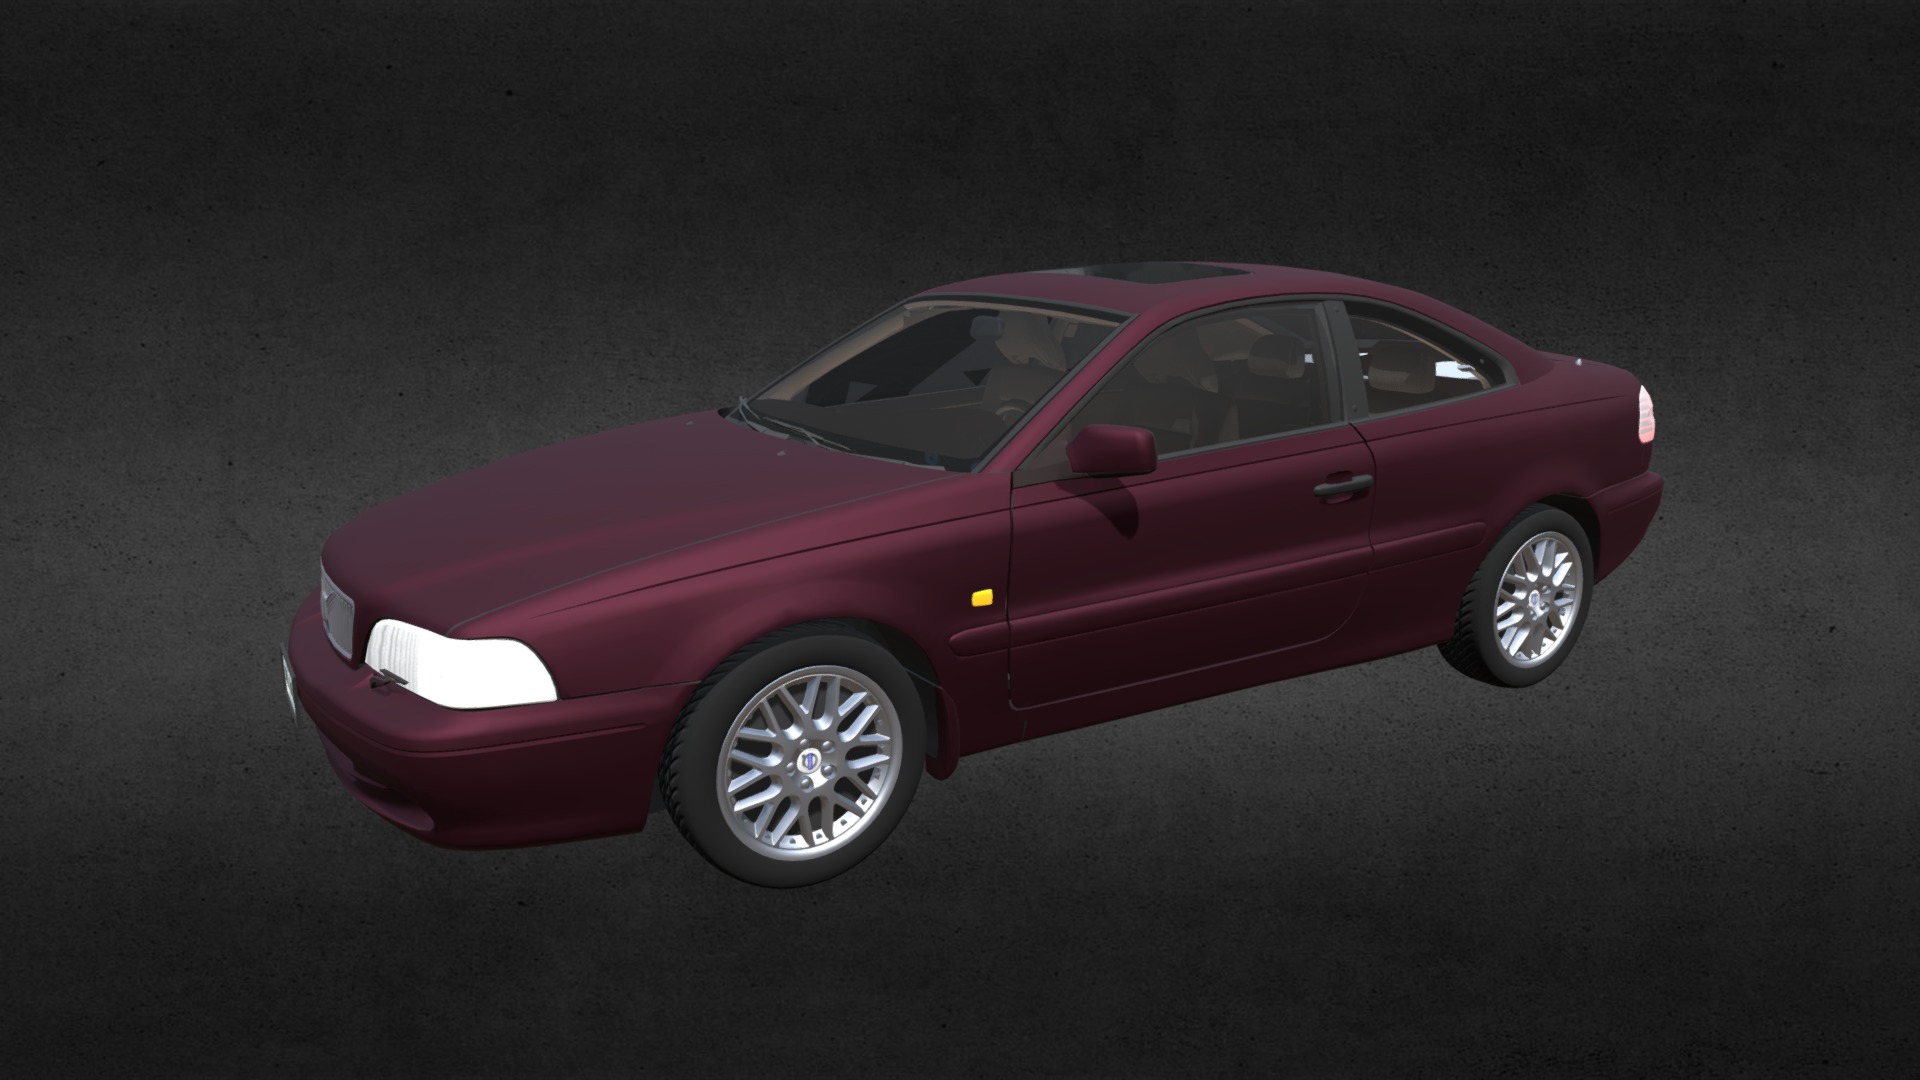 3D model Volvo C70 - This is a 3D model of the Volvo C70. The 3D model is about a red car parked on a road.